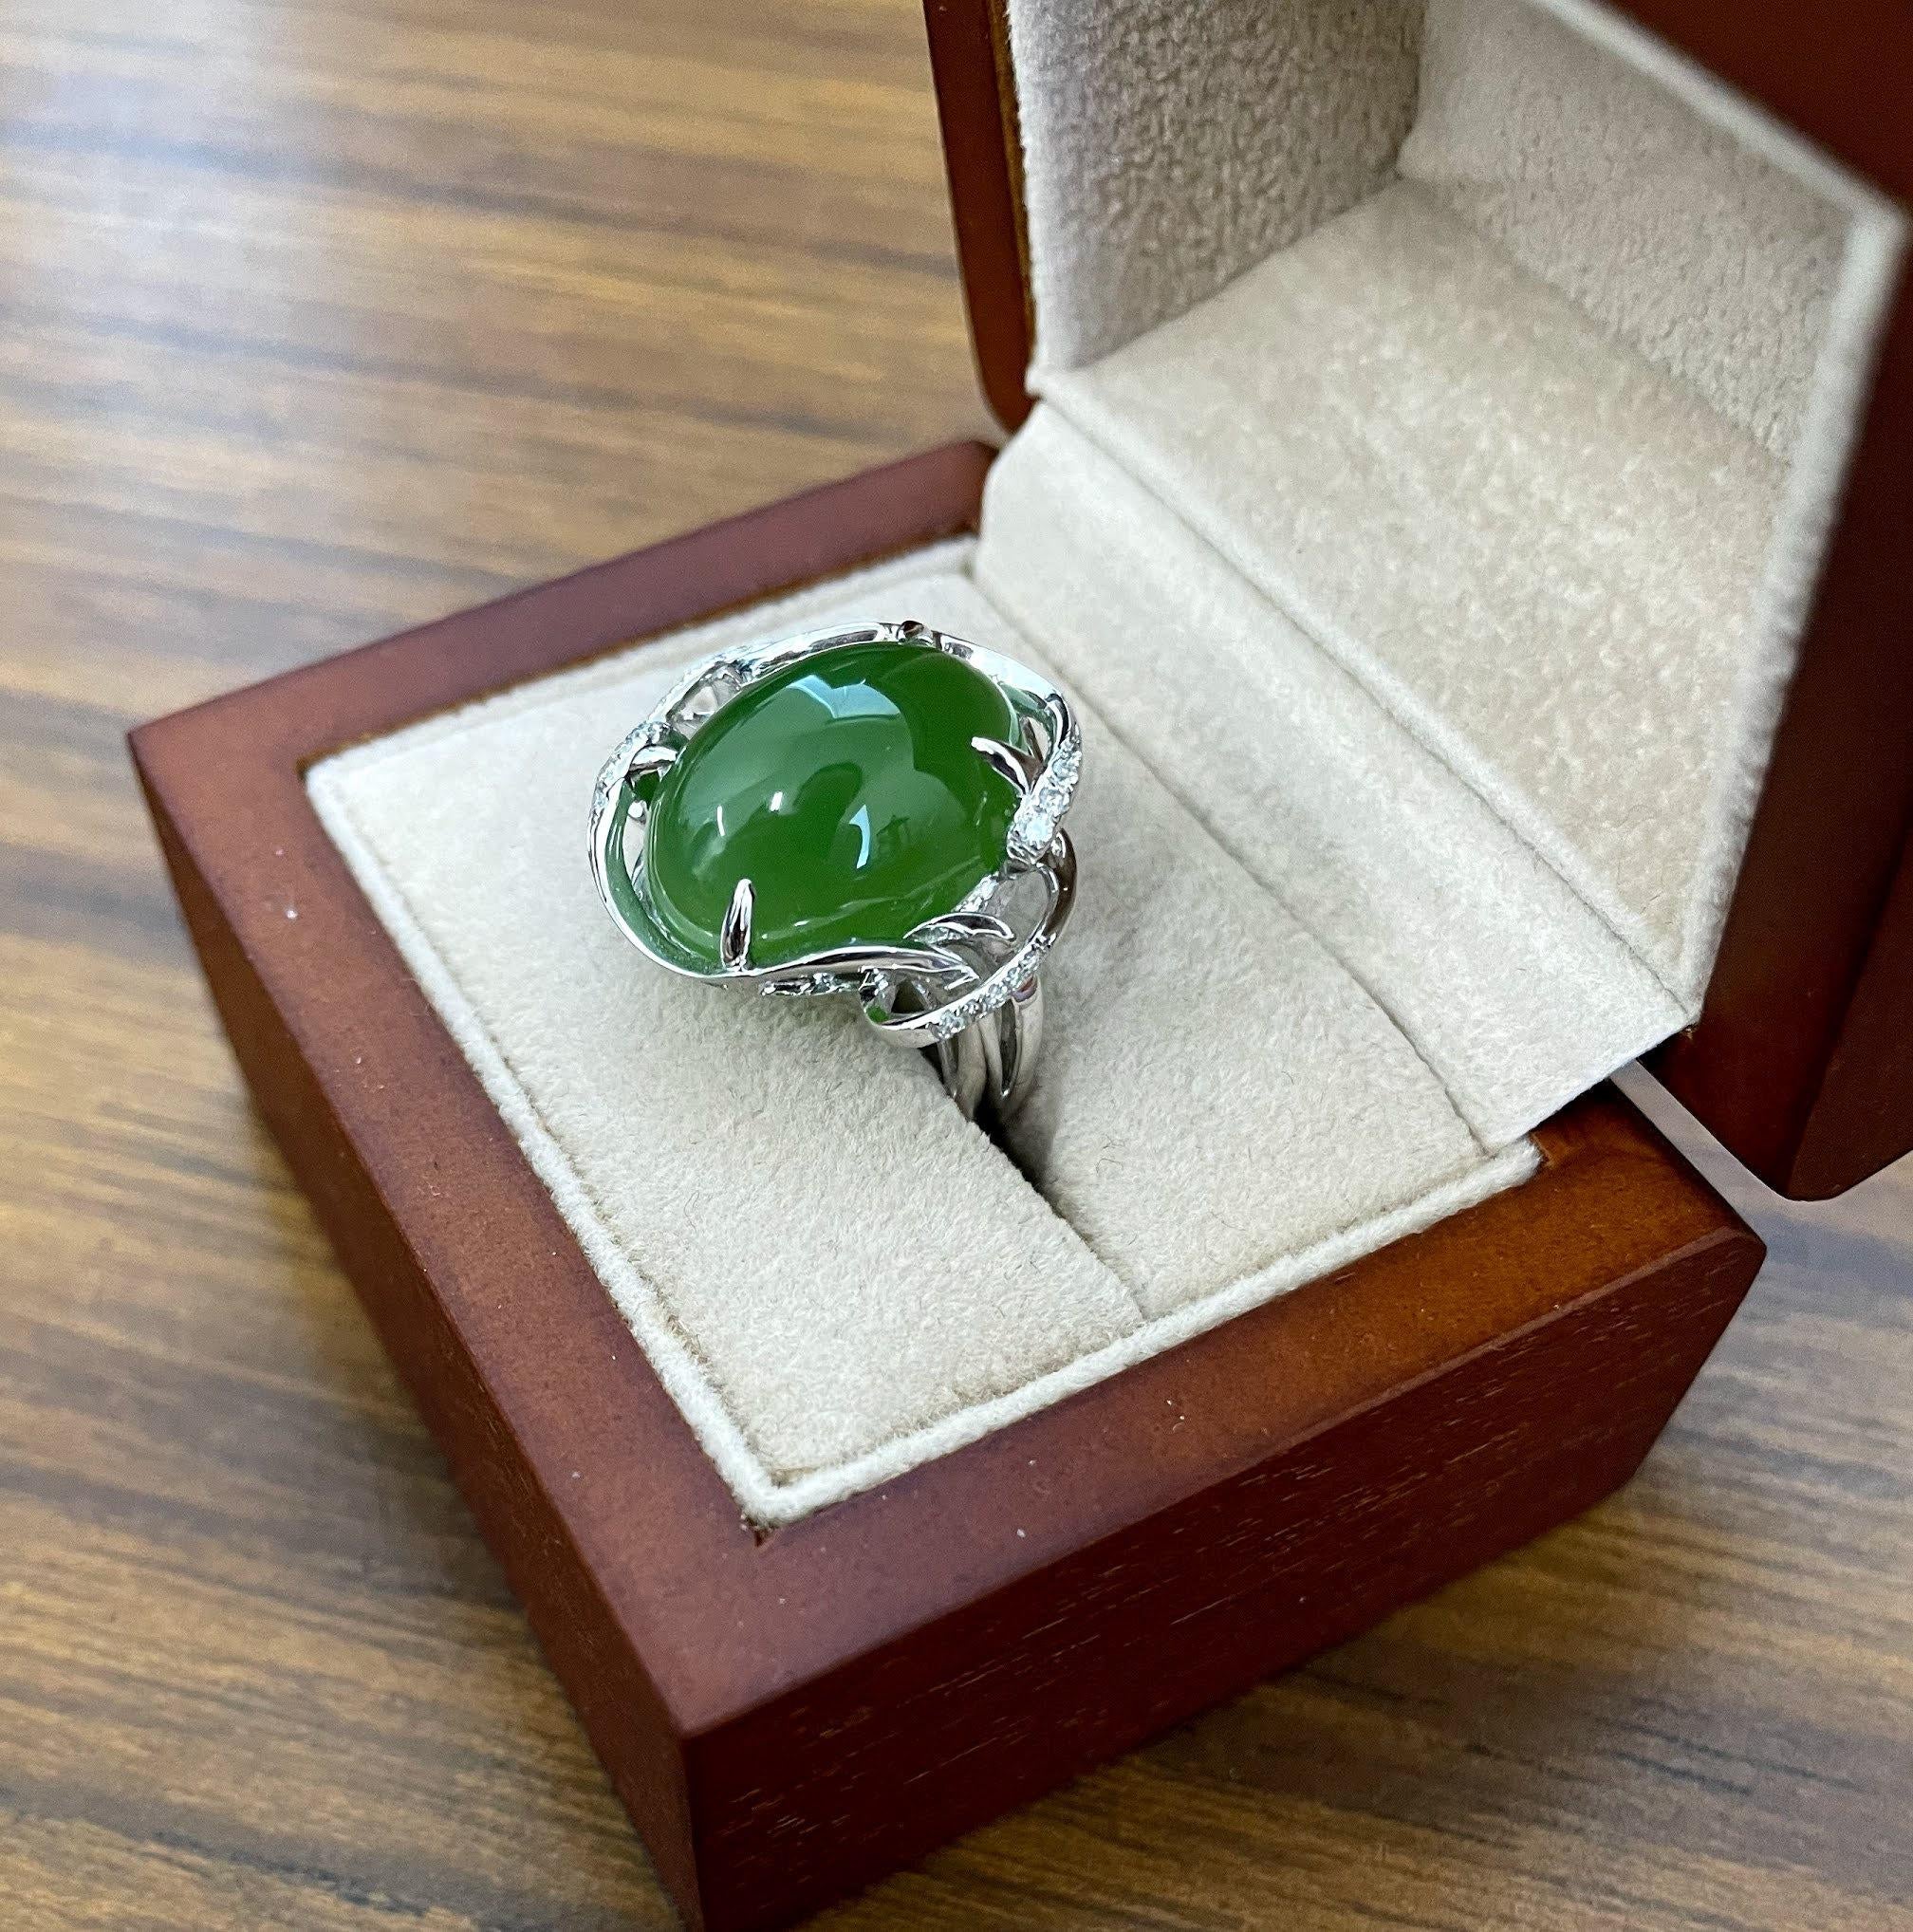 Canadian Jade Ring 18k White Gold with 26 Diamonds



Jade was first identified in Canada by Chinese settlers in 1886 in British Columbia. At this time jade was considered worthless in Canada because the prospectors were searching for gold because